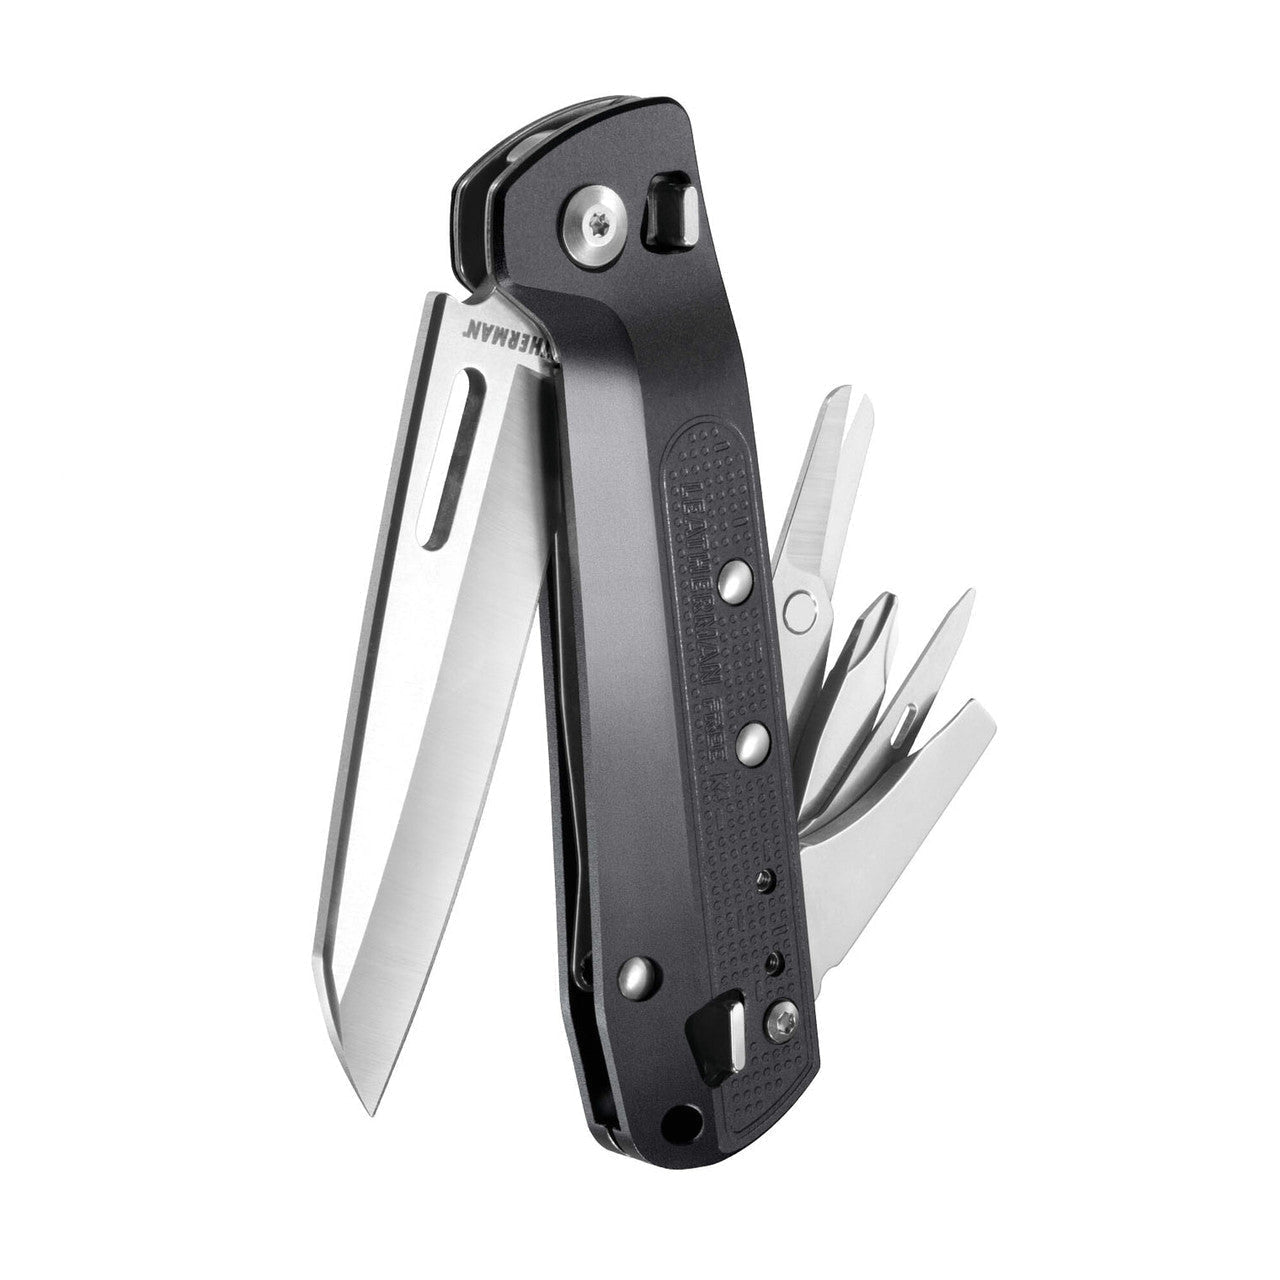 Knives & Tools - Leatherman FREE K4 Knife W/ Magnetic Open/Close